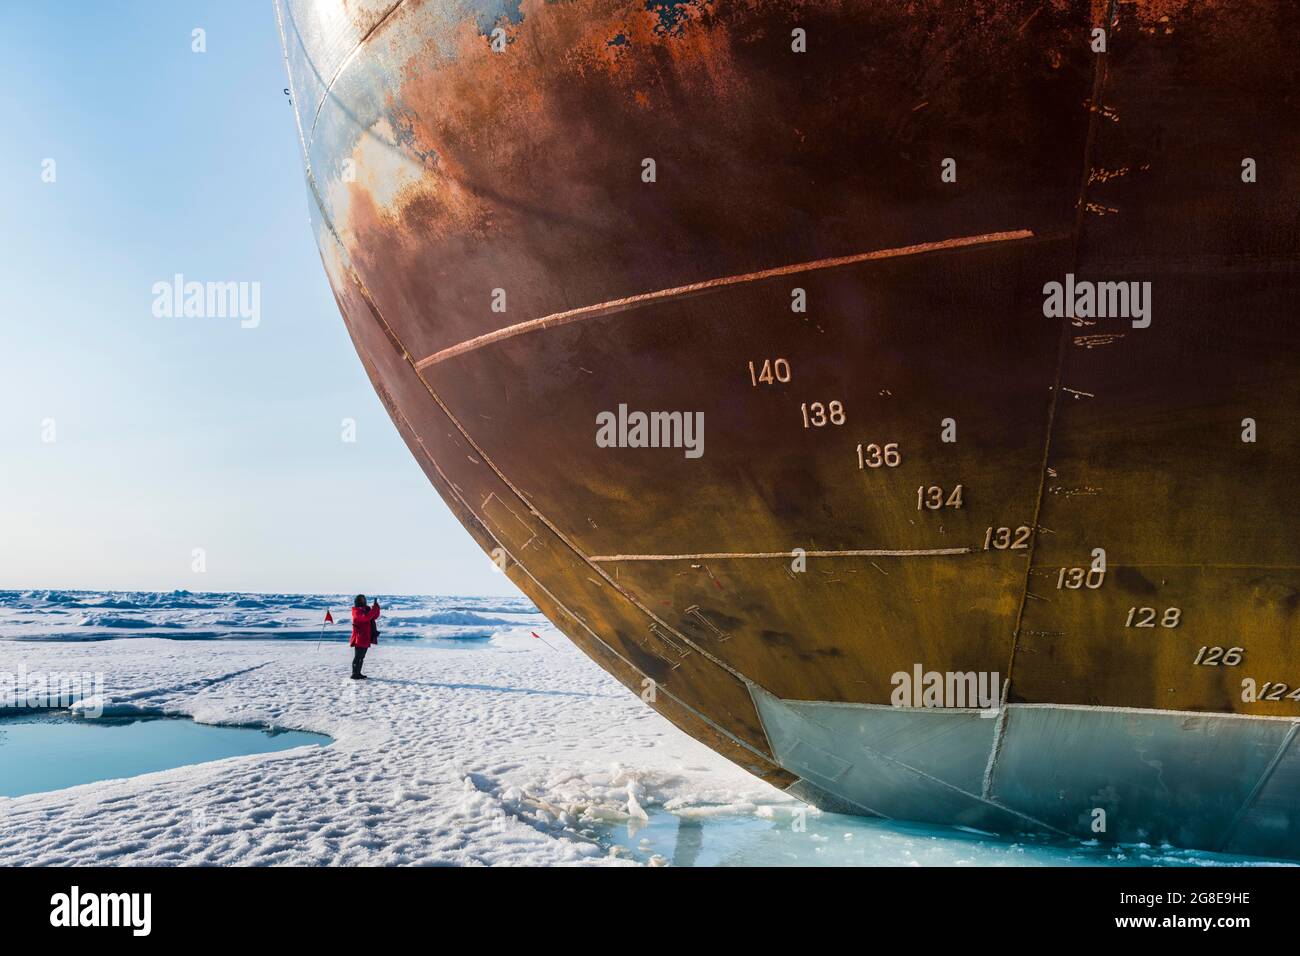 Bow and anchor of the Icebreaker '50 years of victory' on the North Pole, Arctic Stock Photo